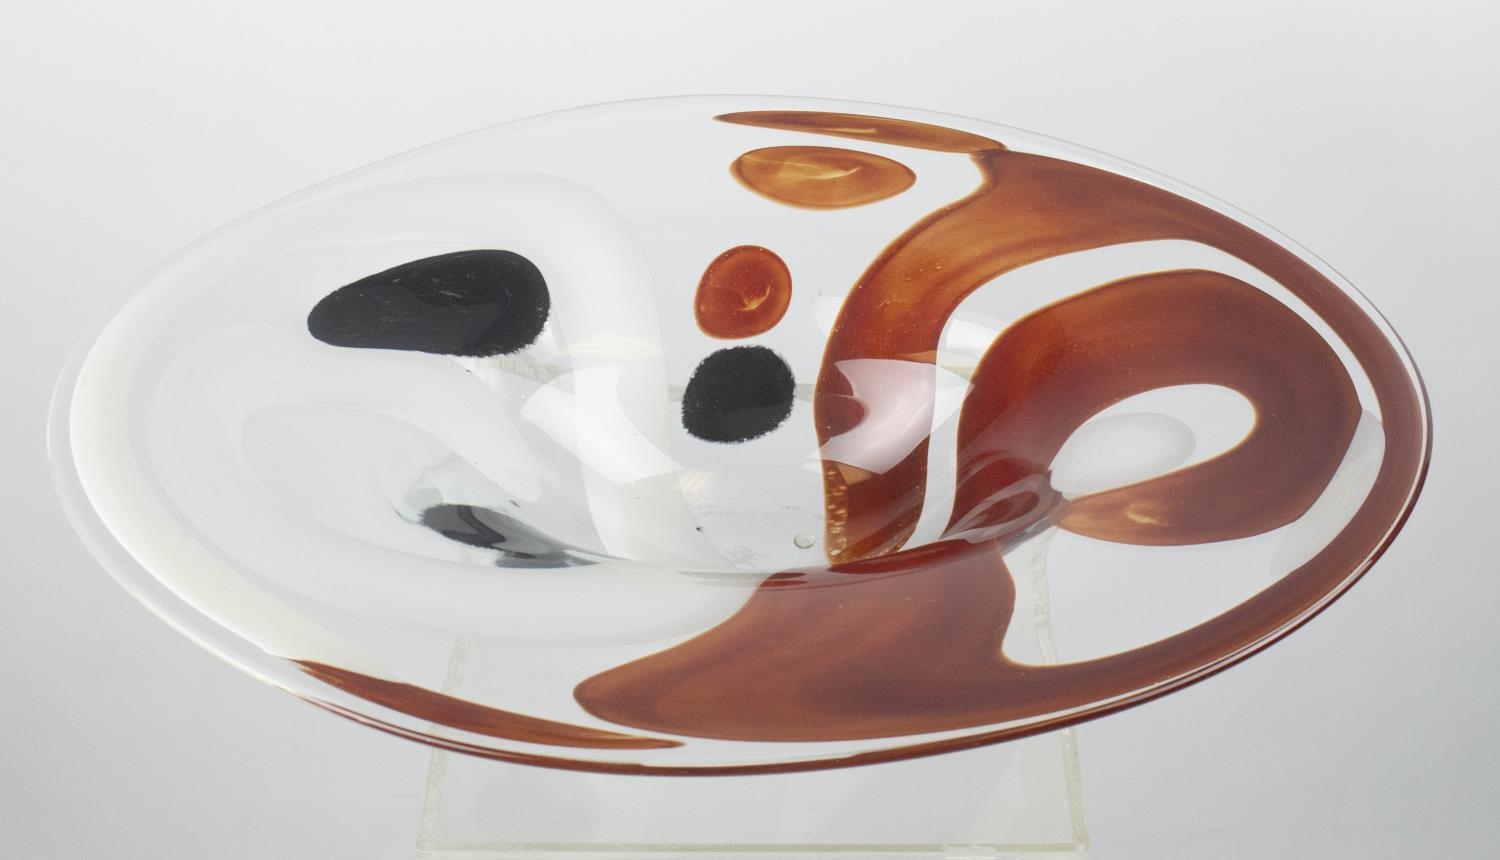 ART GLASS BOWL, late 20th century shaped with red, white and black design, 52cm L x 39cm W x 13cm H. - Image 3 of 8